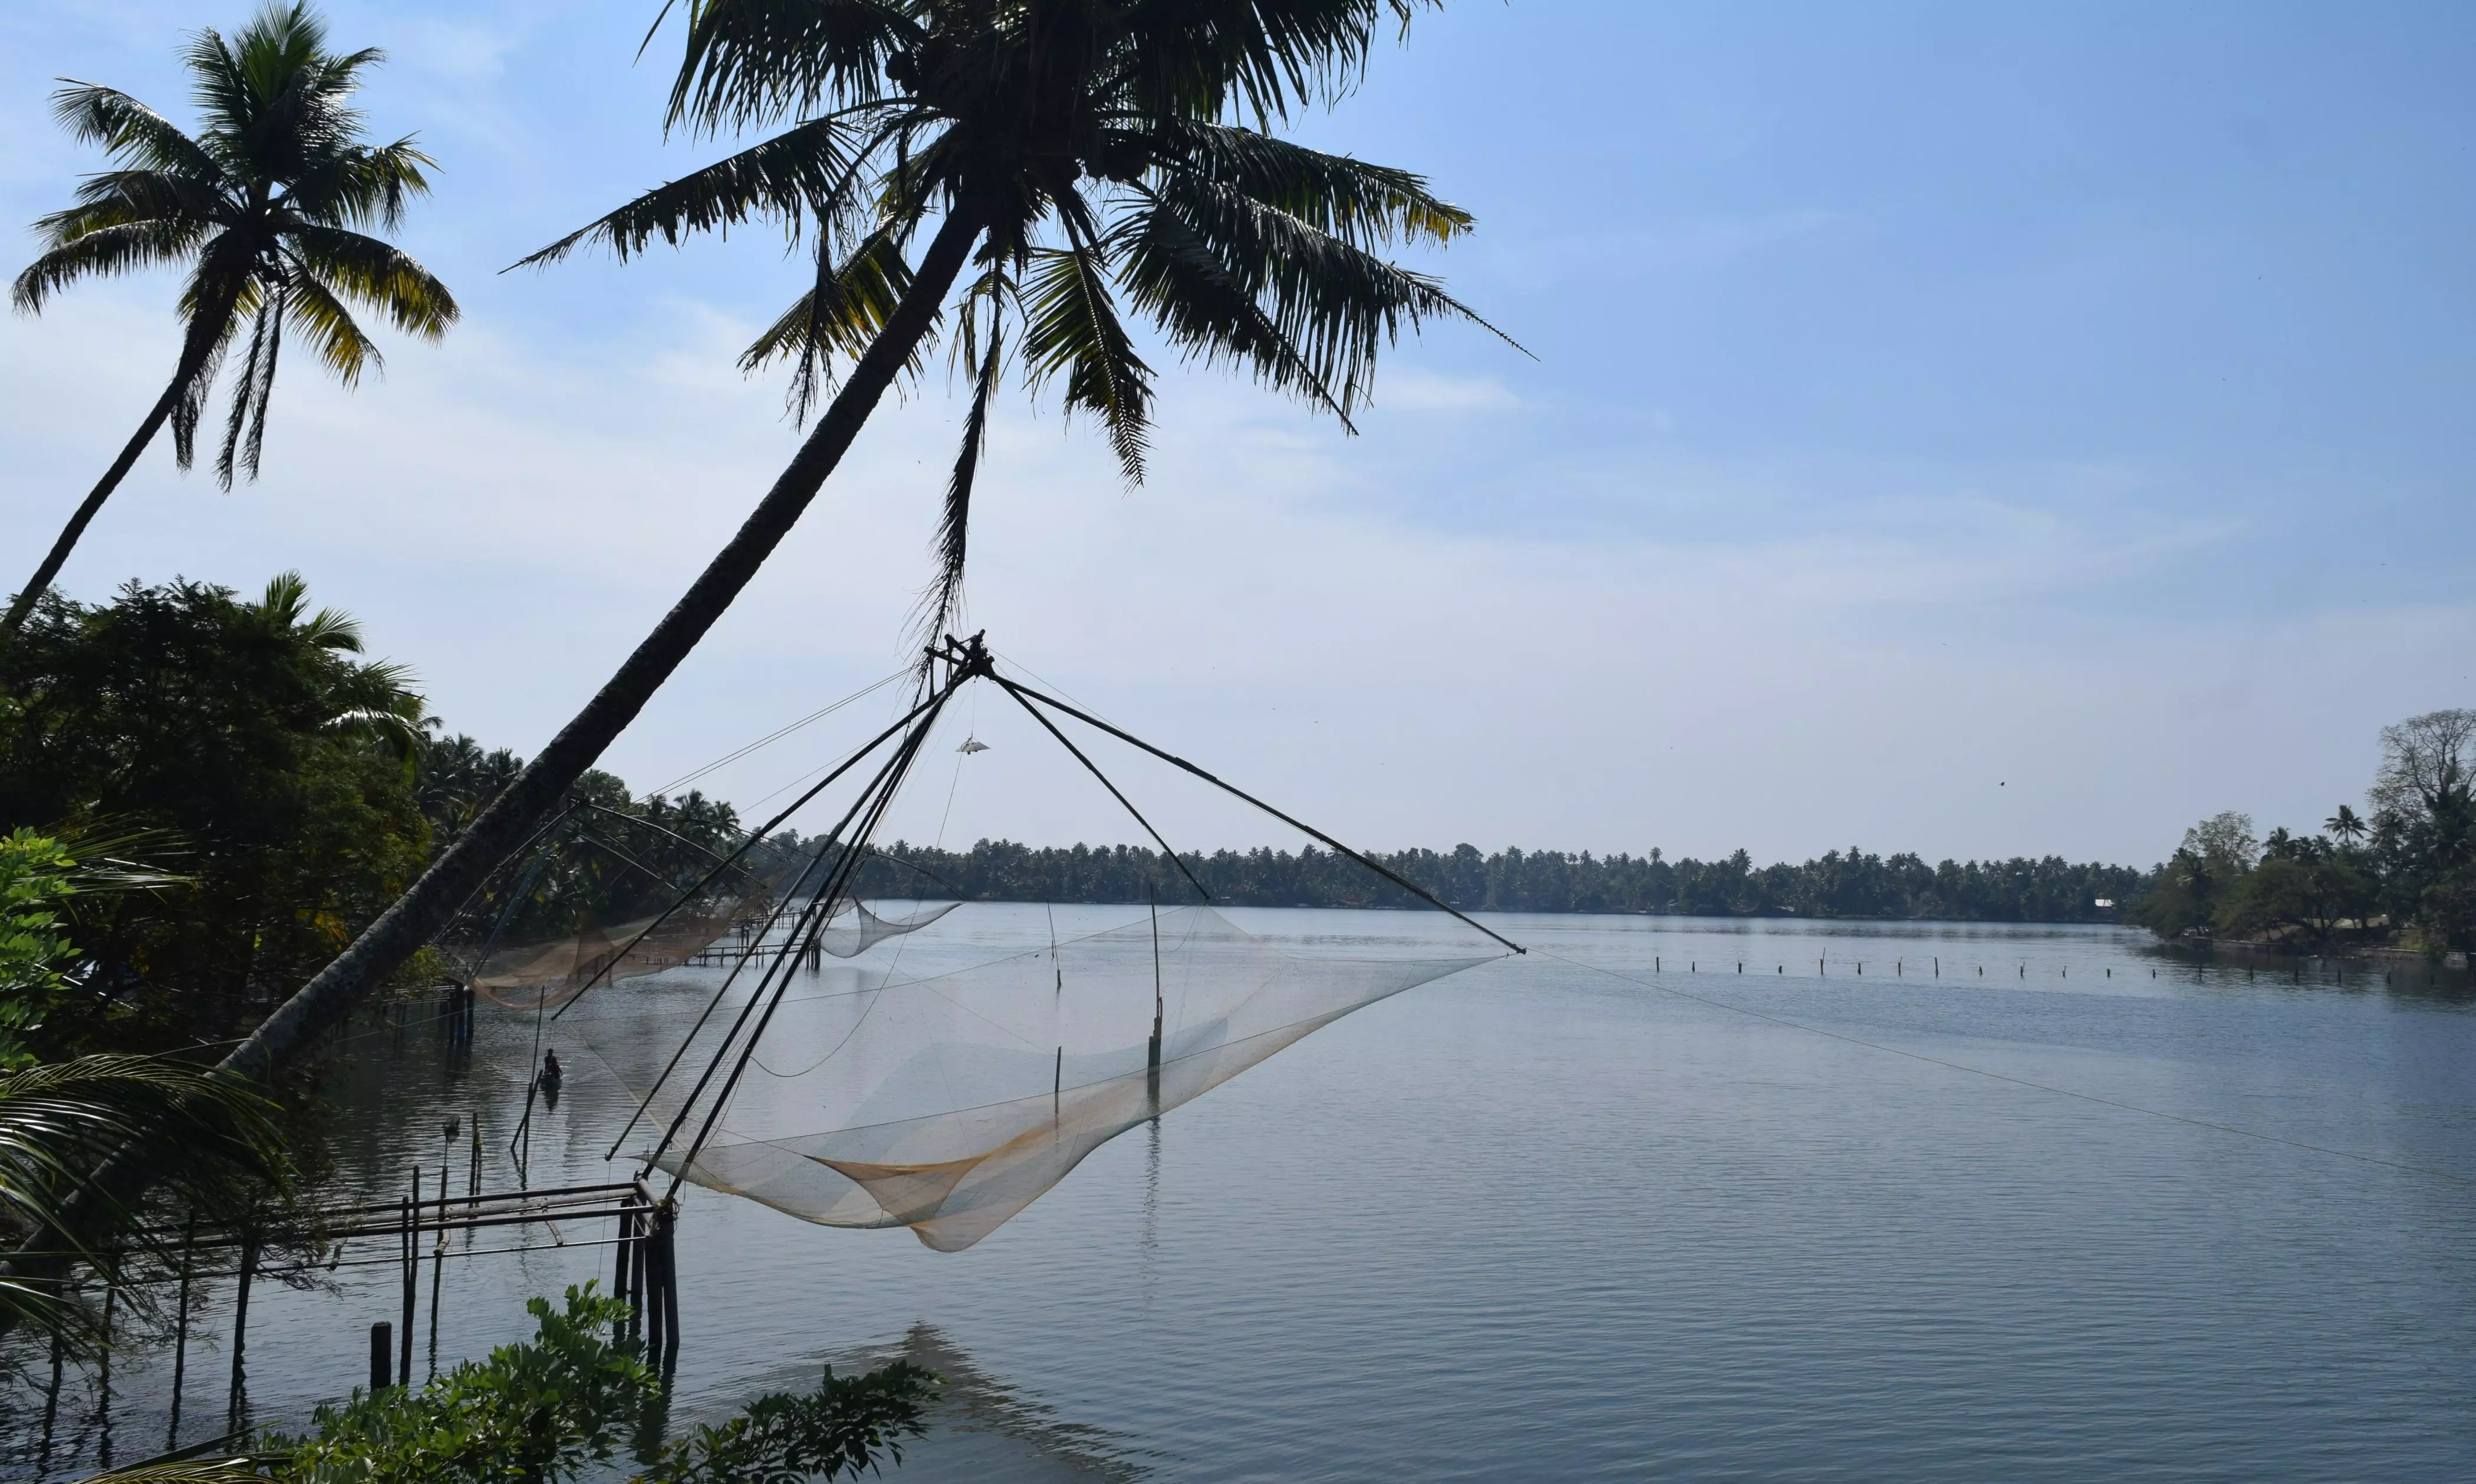 Kerala govt implements measures to prevent recurrence of mass fish death in Periyar